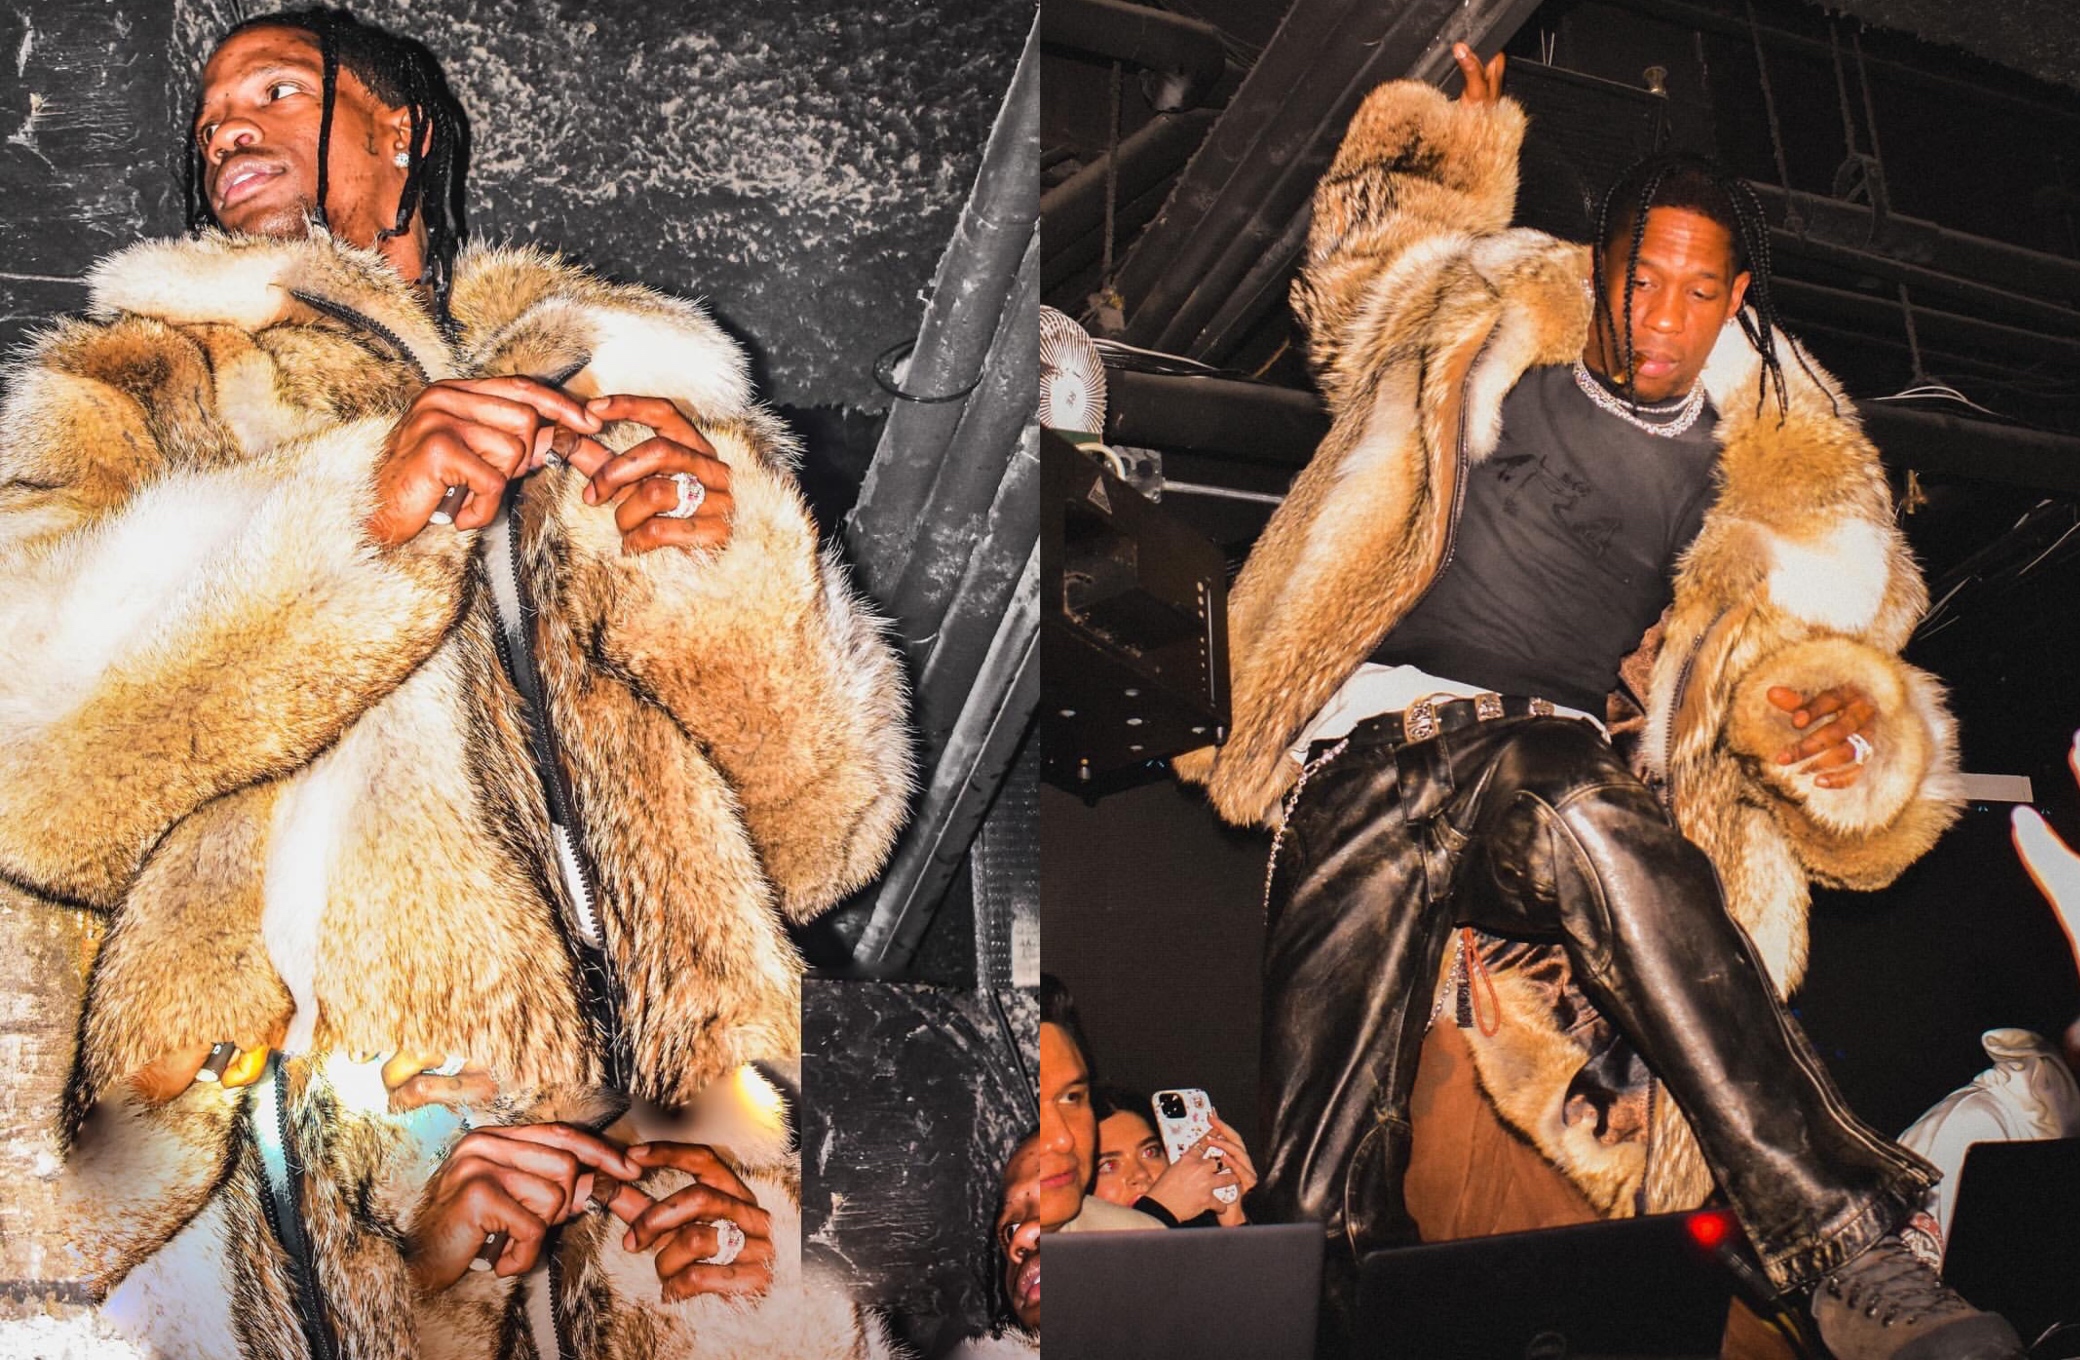 SPOTTED: Travis Scott Lights Up Chicago Wearing Unreleased Givenchy, READYMADE, Chrome Hearts & more